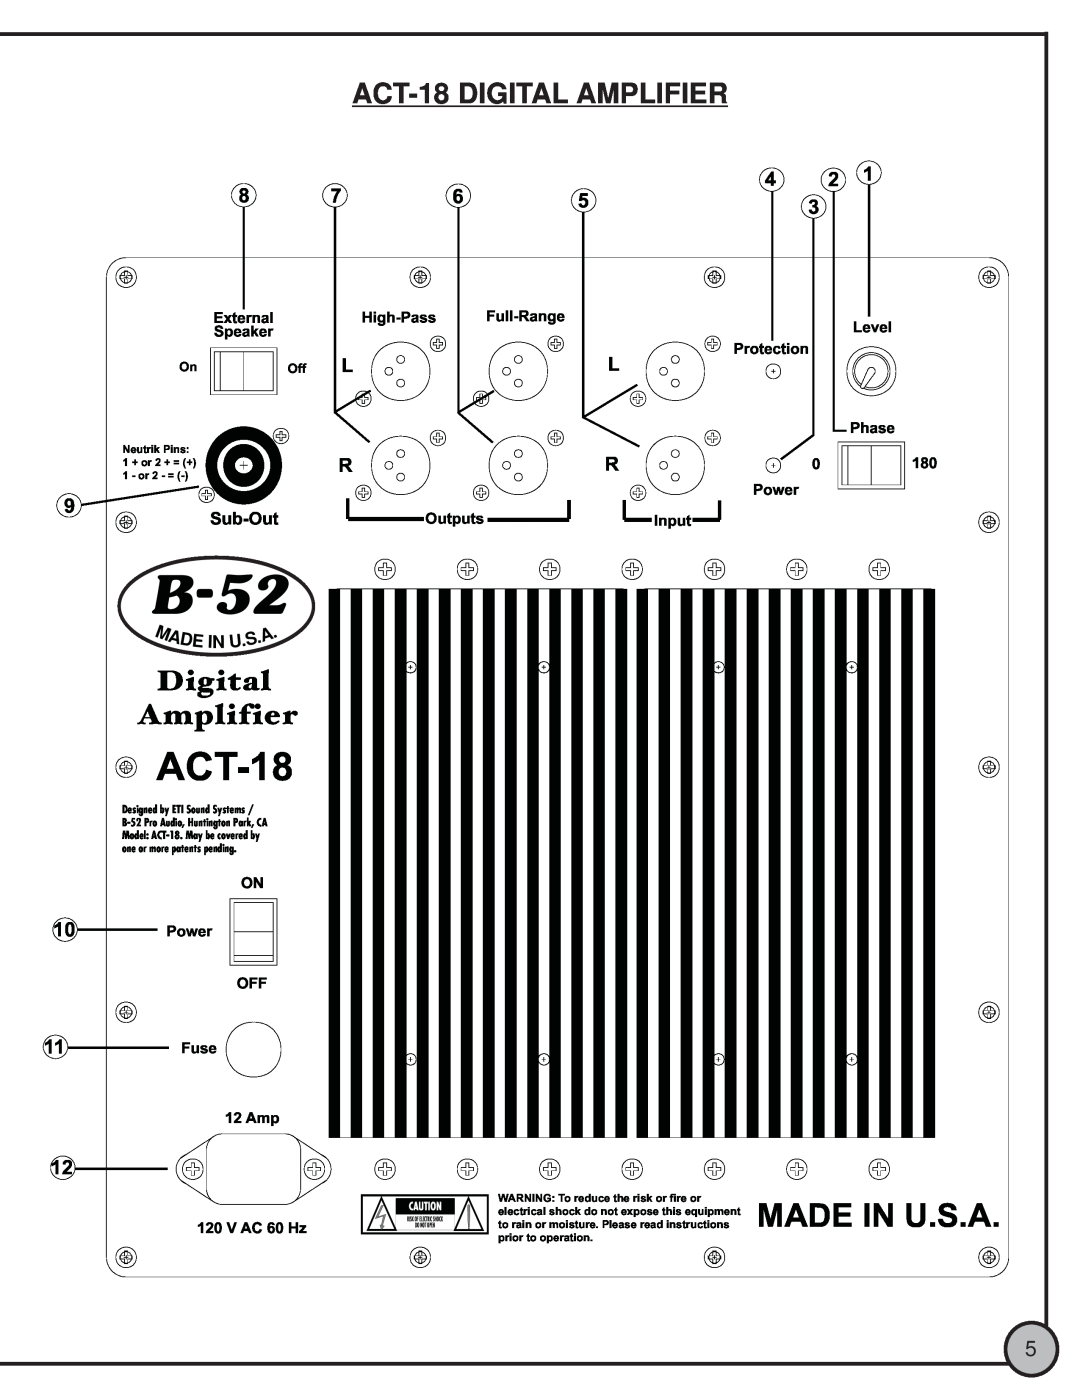 ETI Sound Systems, INC ACT18 manual ACT-18DIGITAL AMPLIFIER, B-52, Made In U.S.A, Digital, Amplifier 